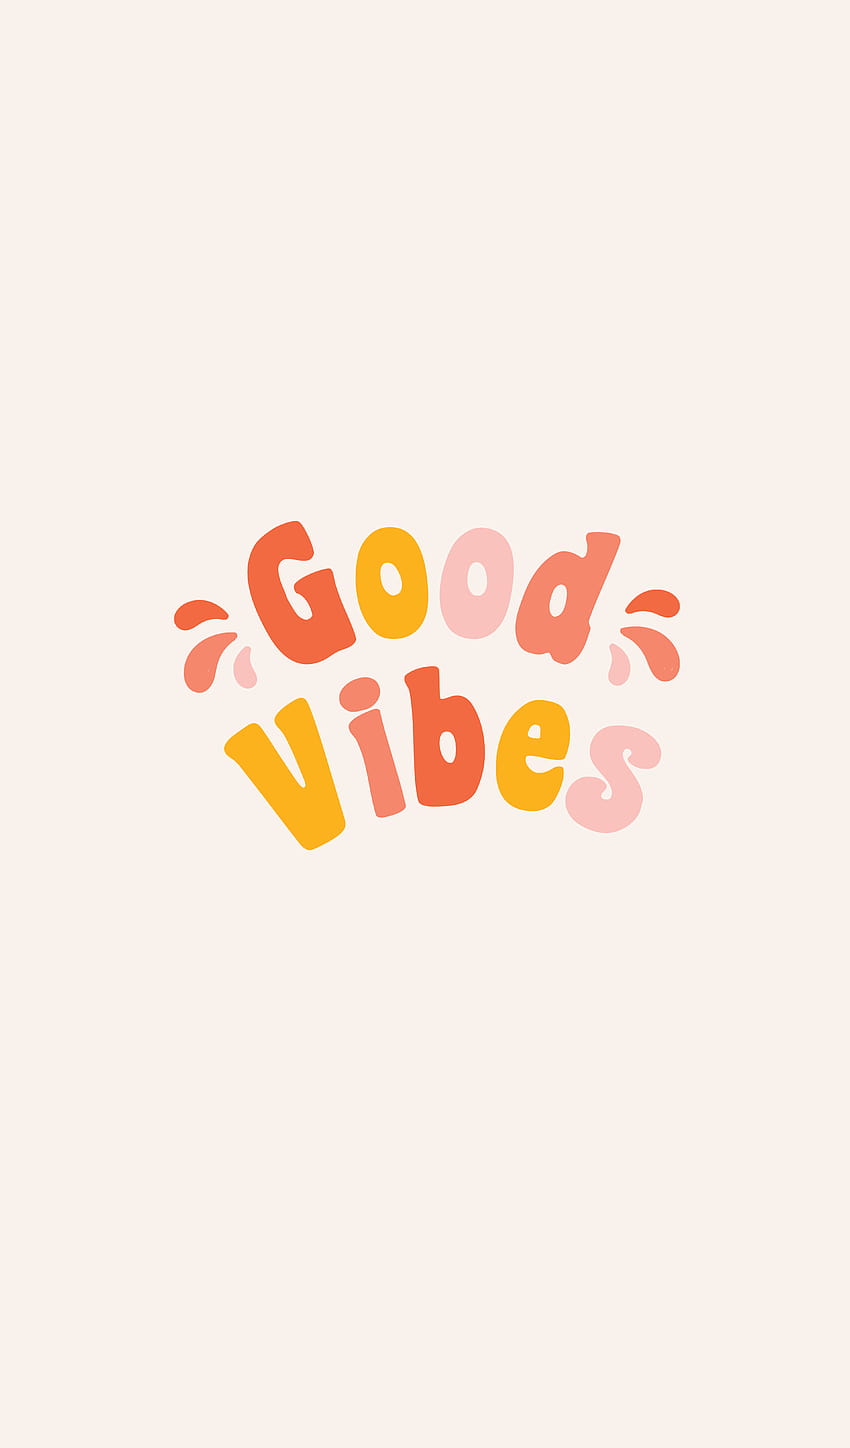 Good vibes only  3D wallpaper by Raimgul Gainullina on Dribbble